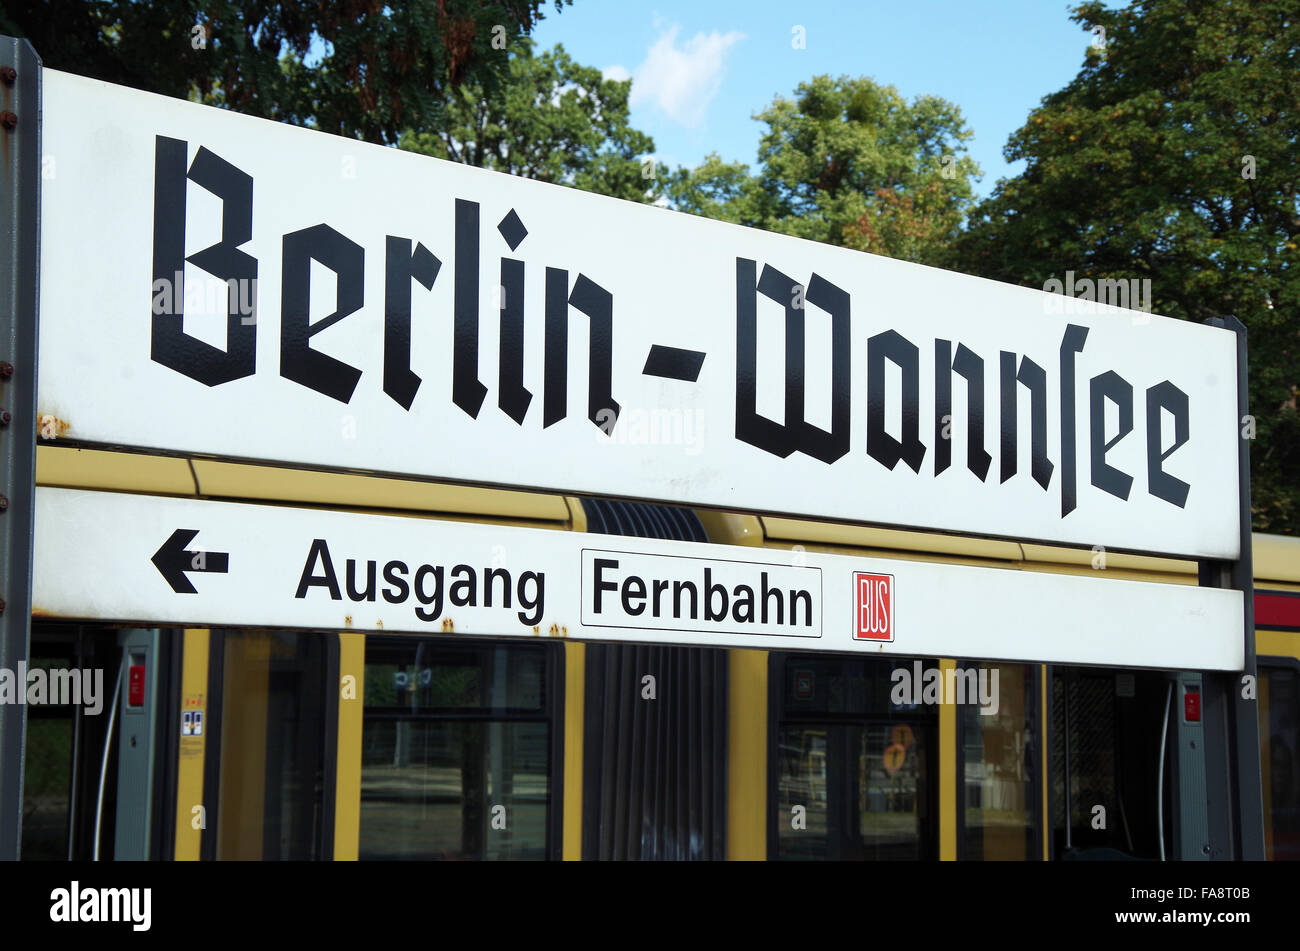 Berlin-Wannsee, railway station sign Gothic script Stock Photo